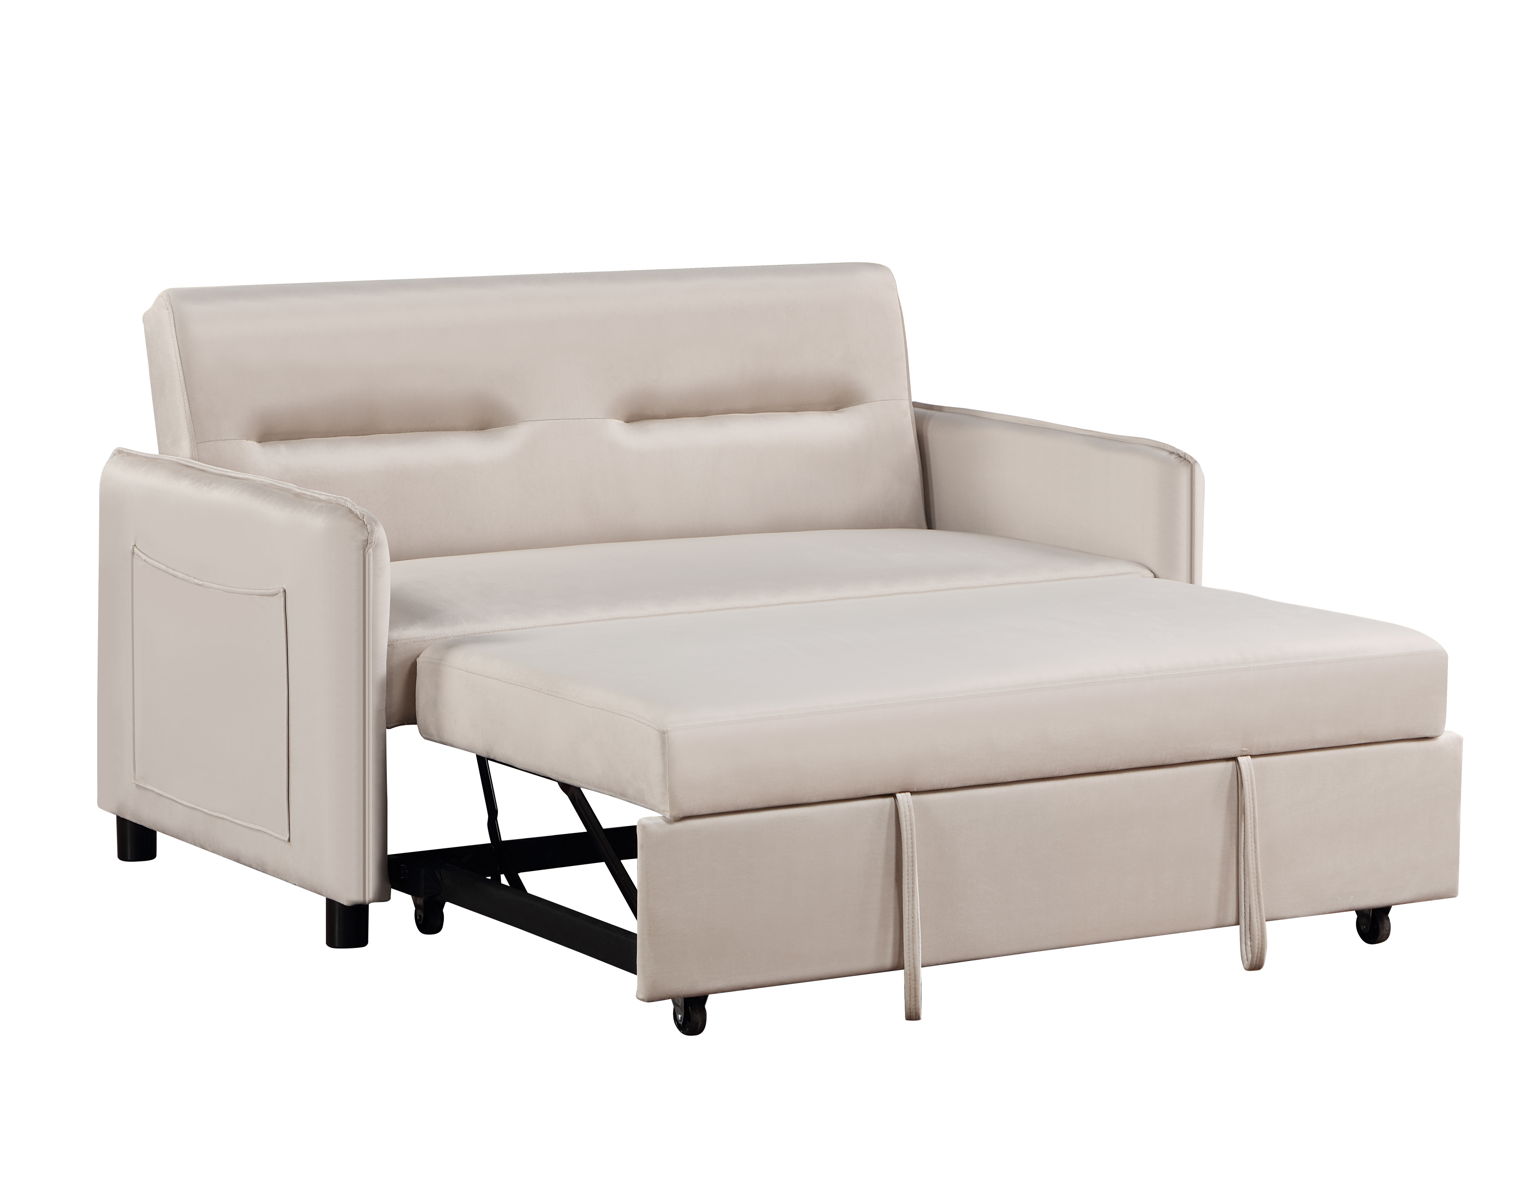 Upholstered Sleeper Sofa 2 Seat Sofabed With 2 Grey Pillow, Beige